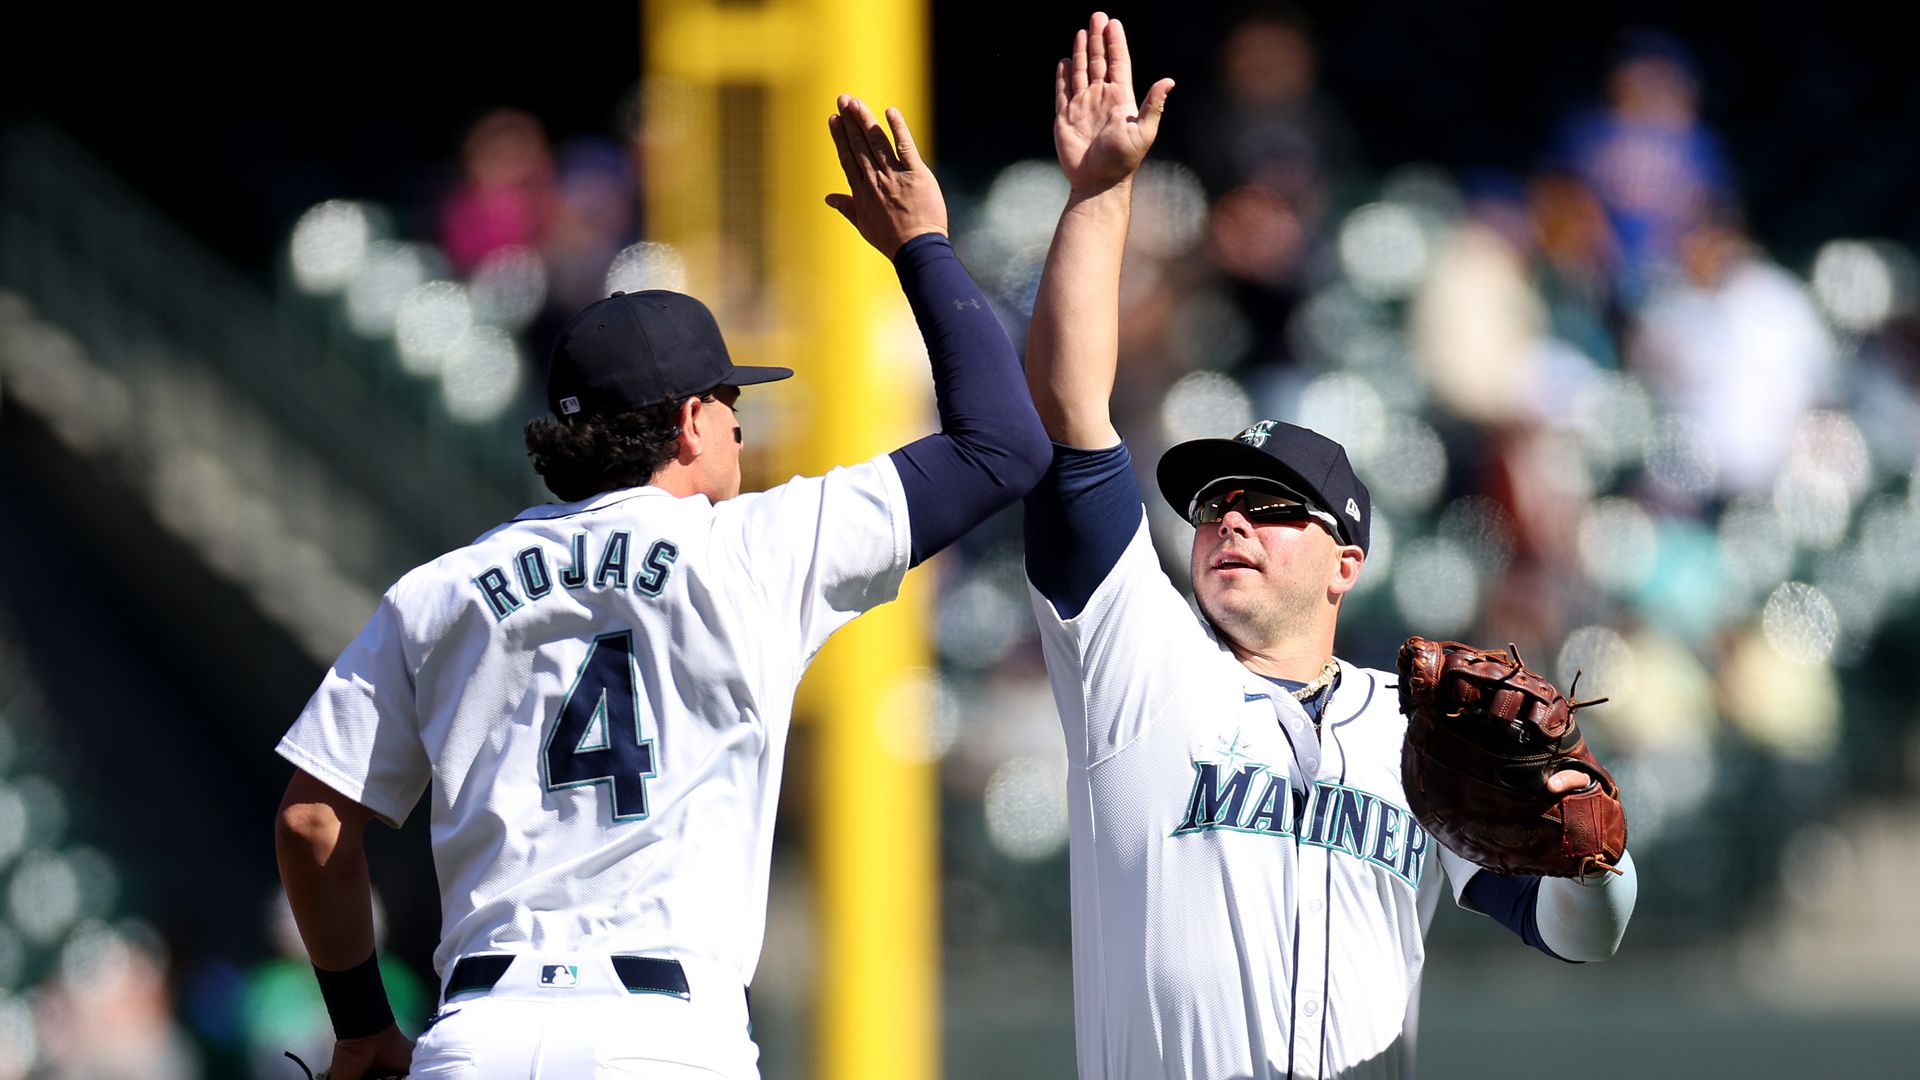 mariners are the cat’s meow, beat the reds 5-1